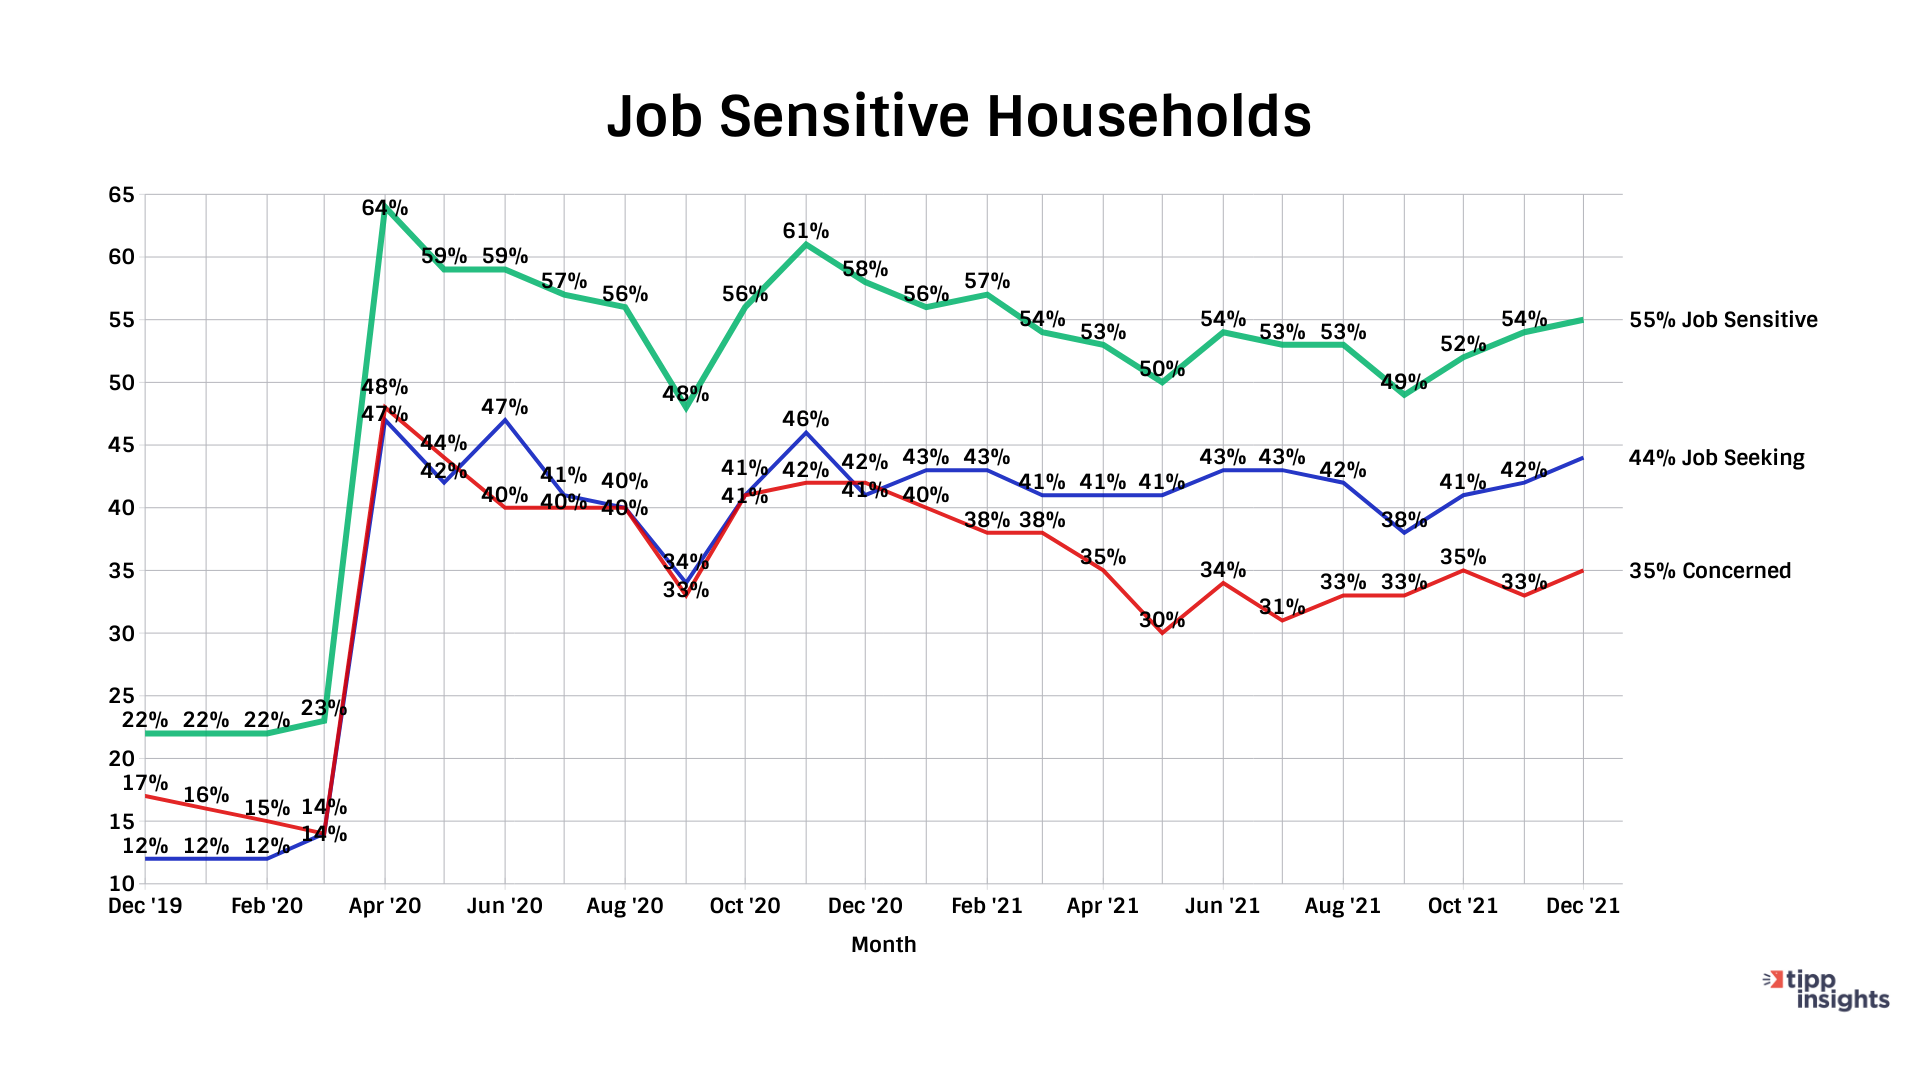 IBD/TIPP Poll Results: Job sensitive households in the United States